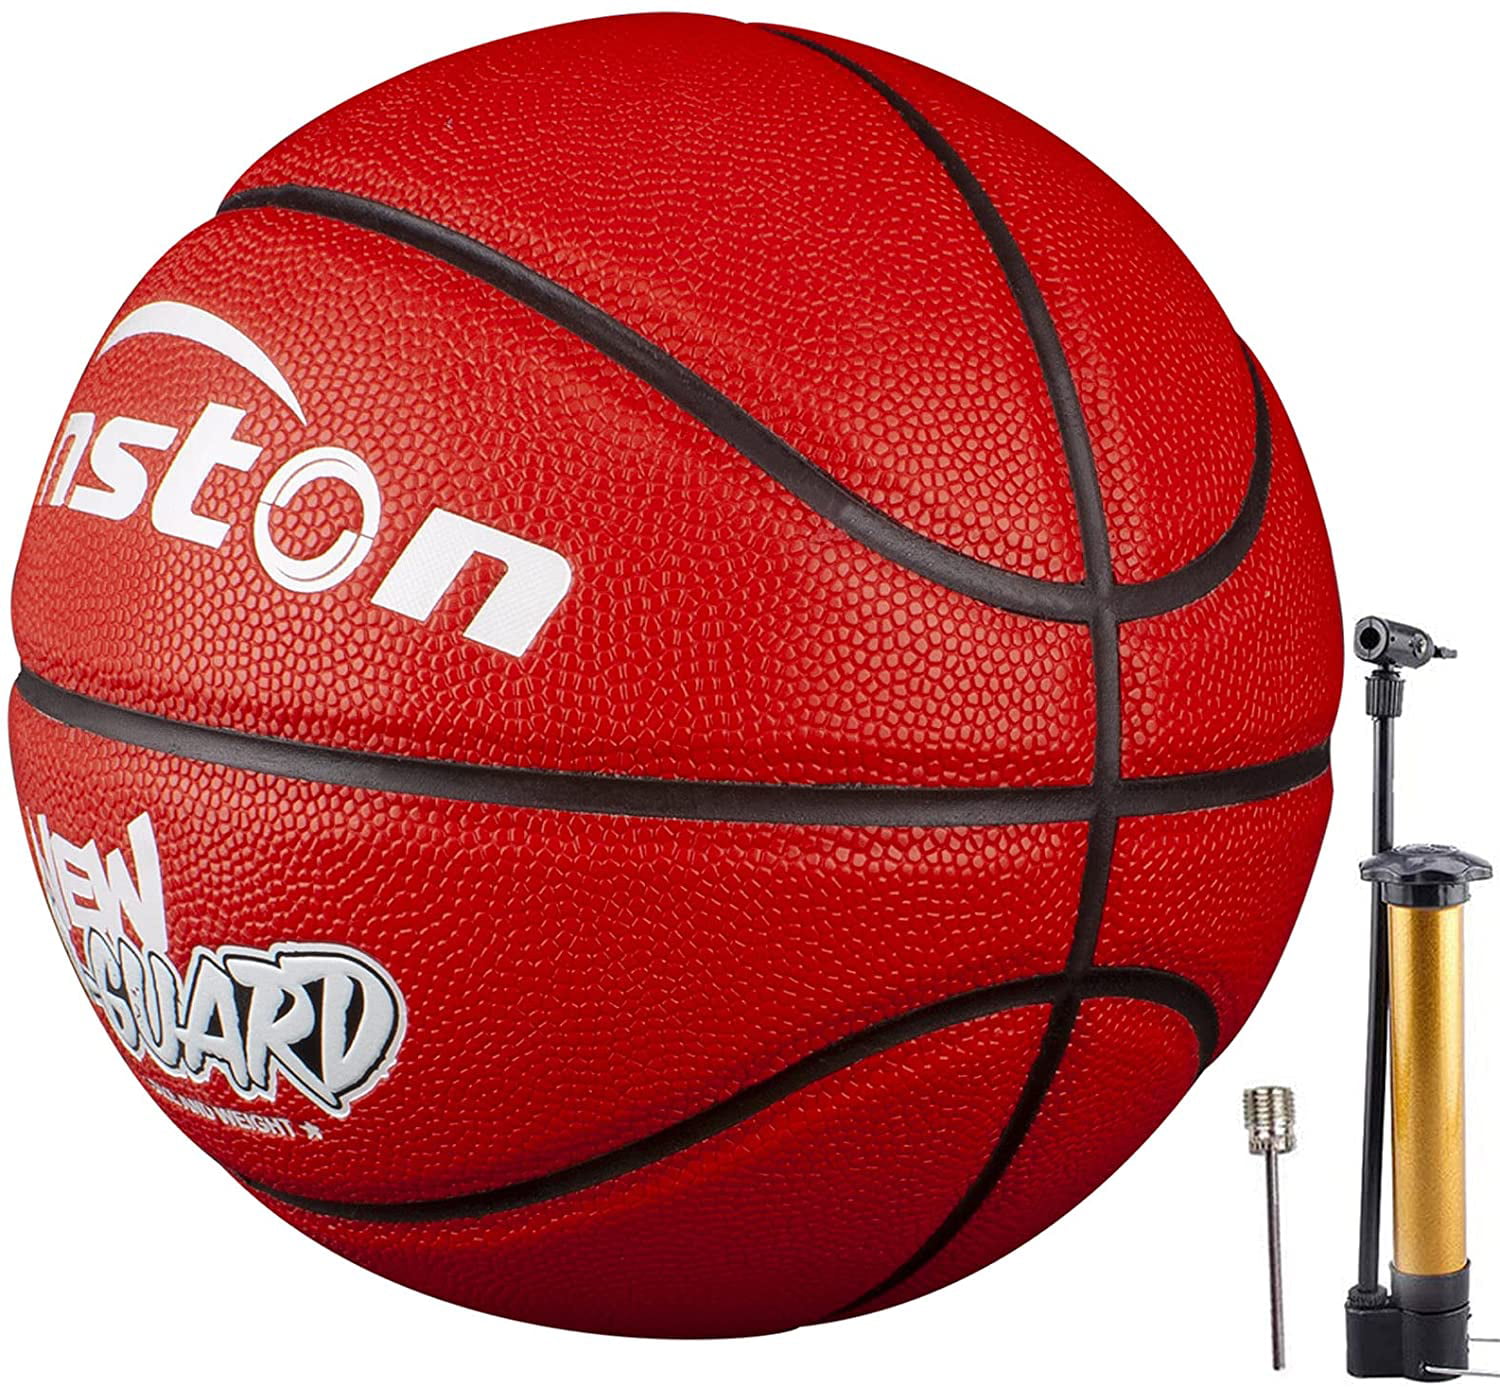 for Play Games Indoor Backyard,Outdoor Park,Beach & Pool Kids Basketball Size 3 ,Youth Basketballs Size 5 22 27.5 